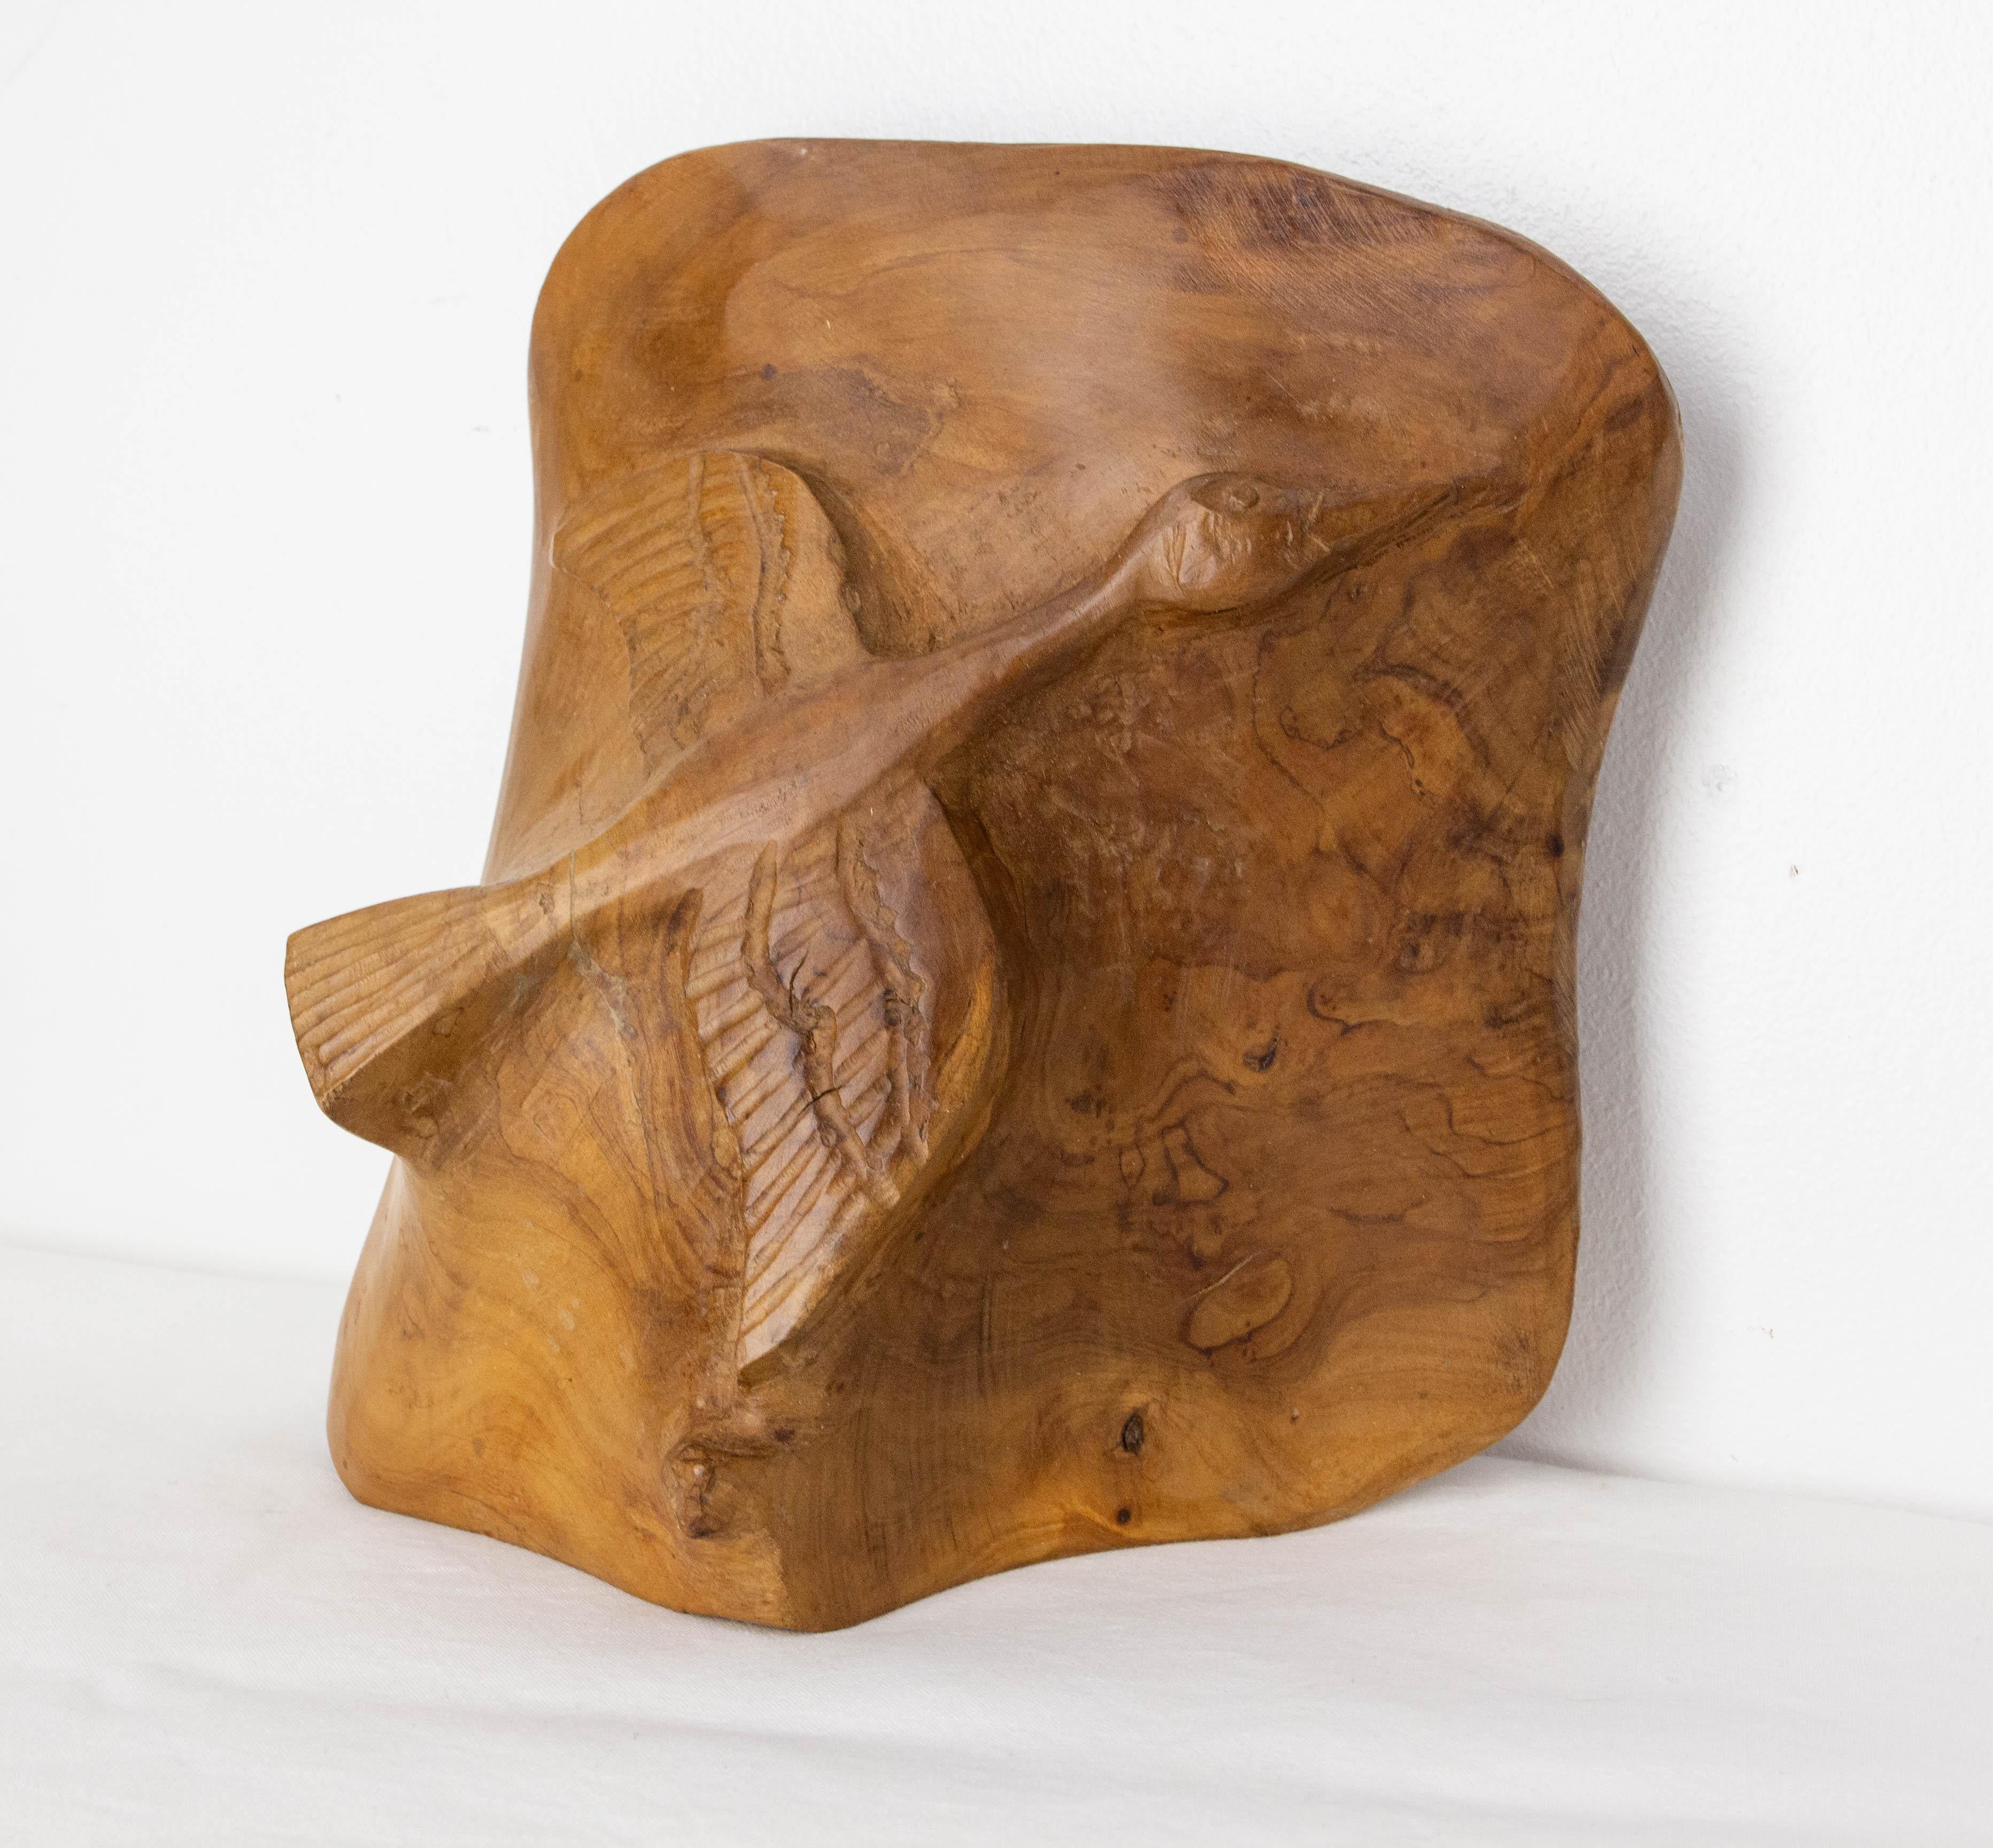 This atypical item is both an empty pocket and a sculpture representing a flying goose.
The sculptor has played with the veins of olive wood to create this unique object with a side where you can see the goose flying in a very realistic creation.